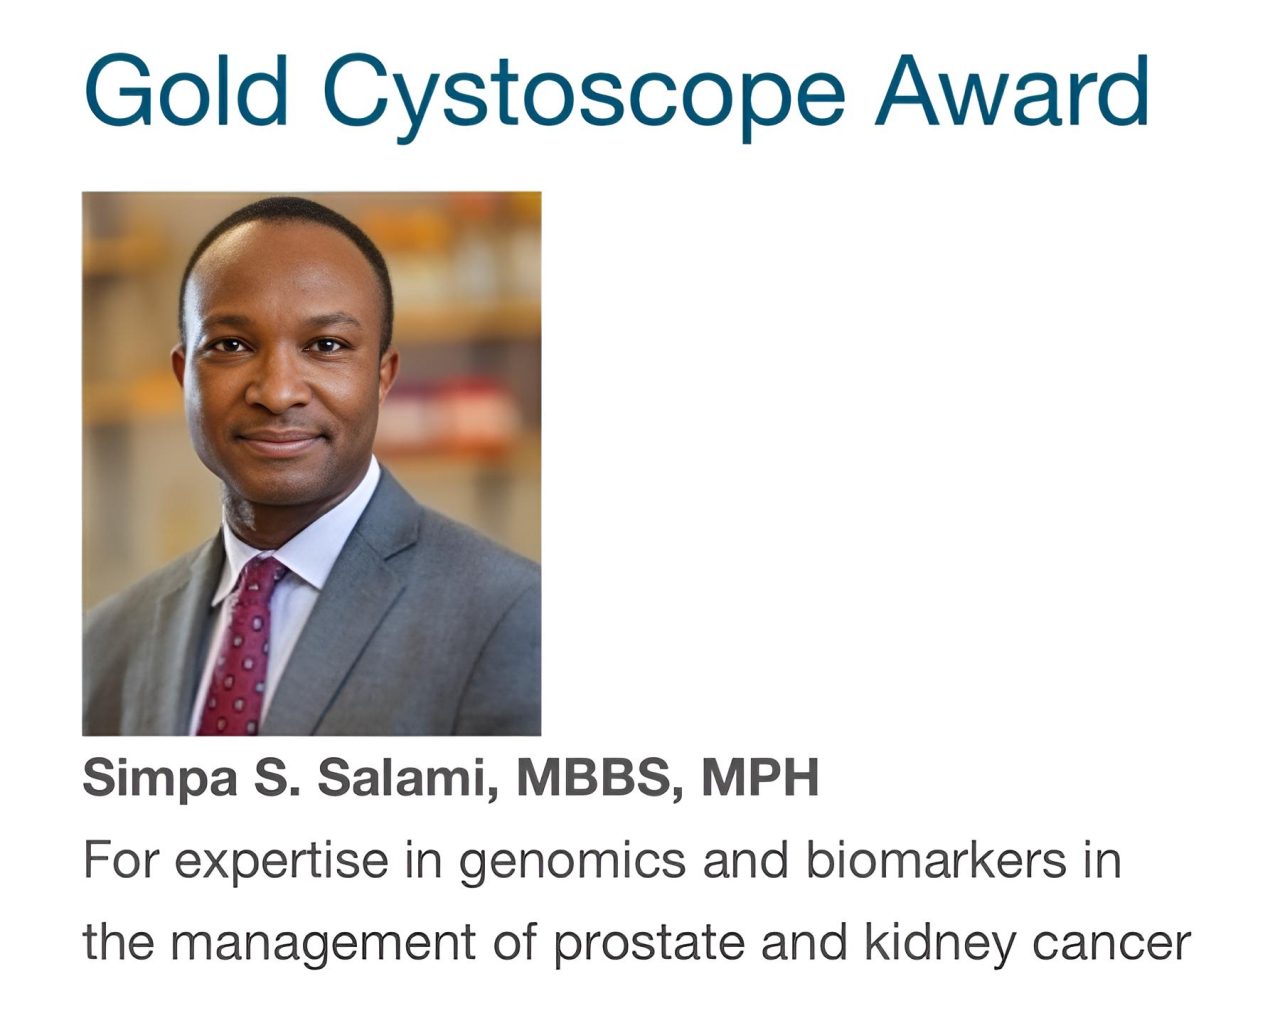 Dr. Salami is the winner of the American Urological Association’s prestigious Gold Cystoscope Award – YUO